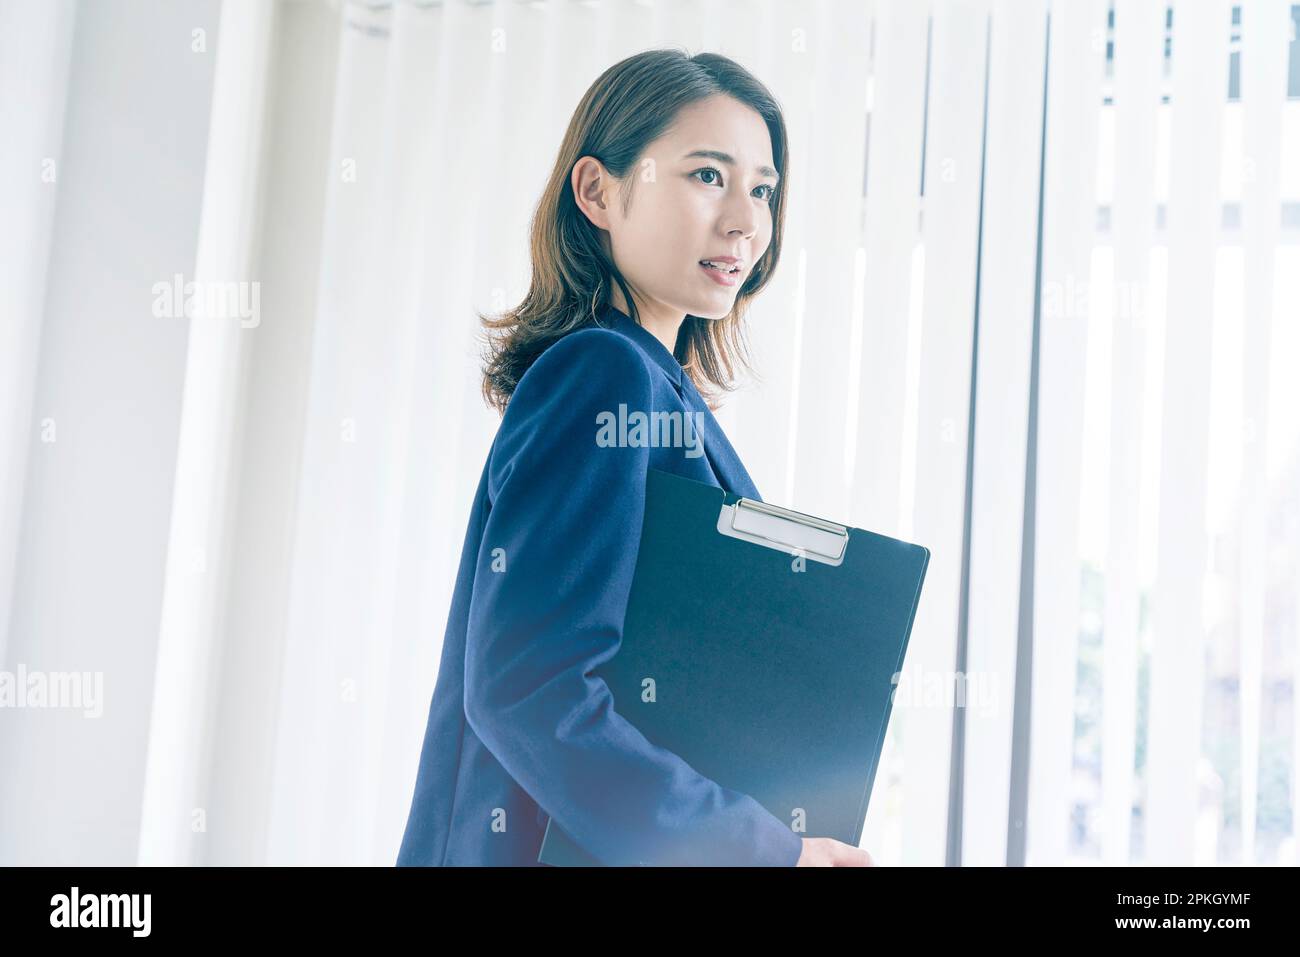 Woman carrying a binder Stock Photo